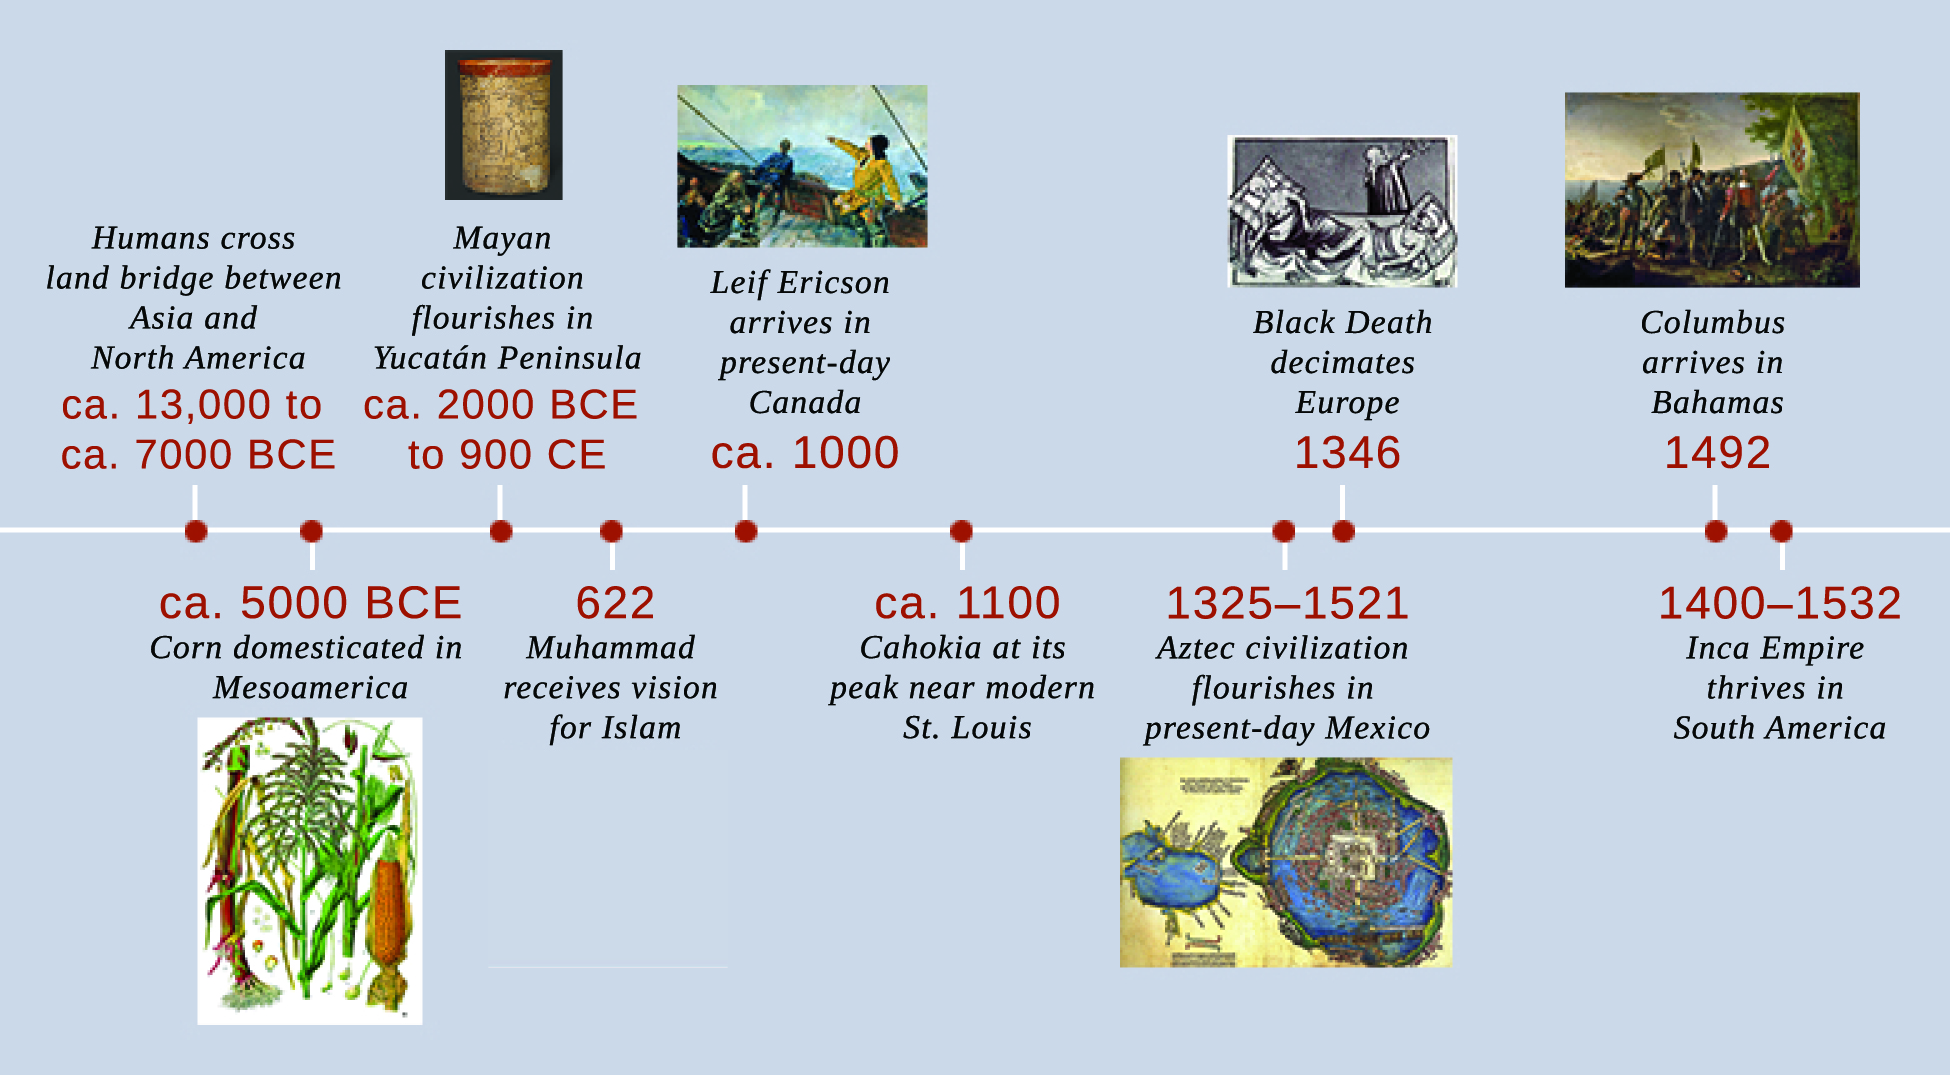 A timeline shows important events of the era. In ca. 13,000 to ca. 7000 BCE, humans cross the land bridge between Asia and North America. In ca. 5000 BCE, corn is domesticated in Mesoamerica; an illustration of the corn plant is shown. In ca. 2000 BCE to ca. 900 CE, Mayan civilization flourishes in the Yucatán Peninsula; Mayan pottery is shown. In 622, Muhammad receives the vision for Islam. In ca. 1000, Leif Ericson arrives in present-day Canada; a painting depicting Ericson’s arrival is shown. In ca. 1100, Cahokia is at its peak near modern St. Louis. In 1325–1521, Aztec civilization flourishes in present-day Mexico; a map of Tenochtitlán is shown. In 1346, the Black Death decimates Europe; an illustration of Black Death victims is shown. In 1492, Columbus arrives in the Bahamas; a painting of Columbus’s arrival is shown. In 1400–1532, the Inca Empire thrives in South America.